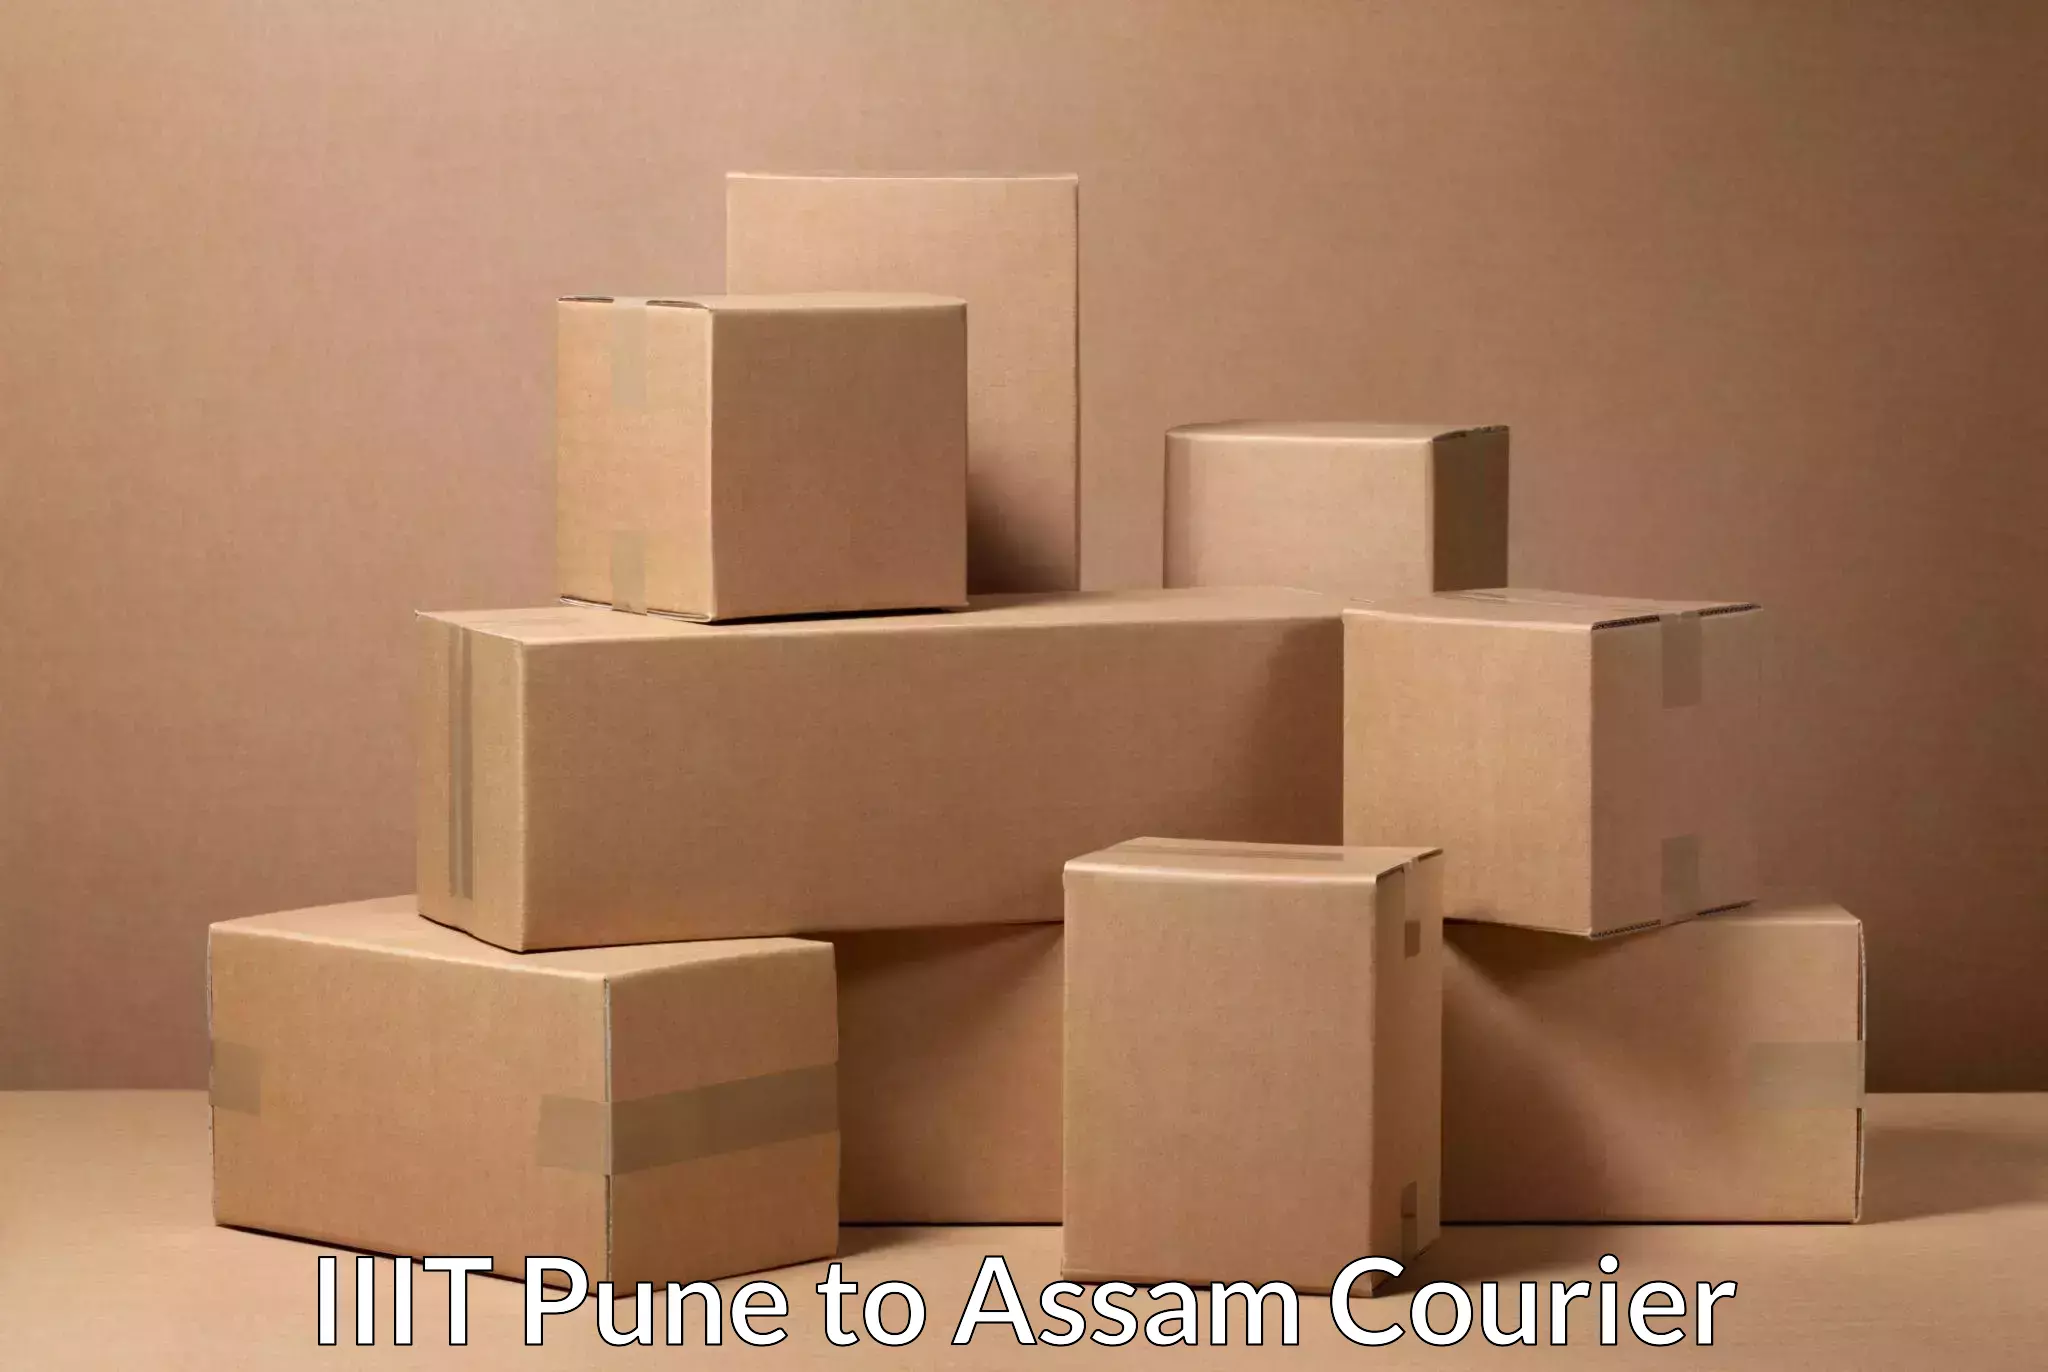 Local delivery service IIIT Pune to Assam